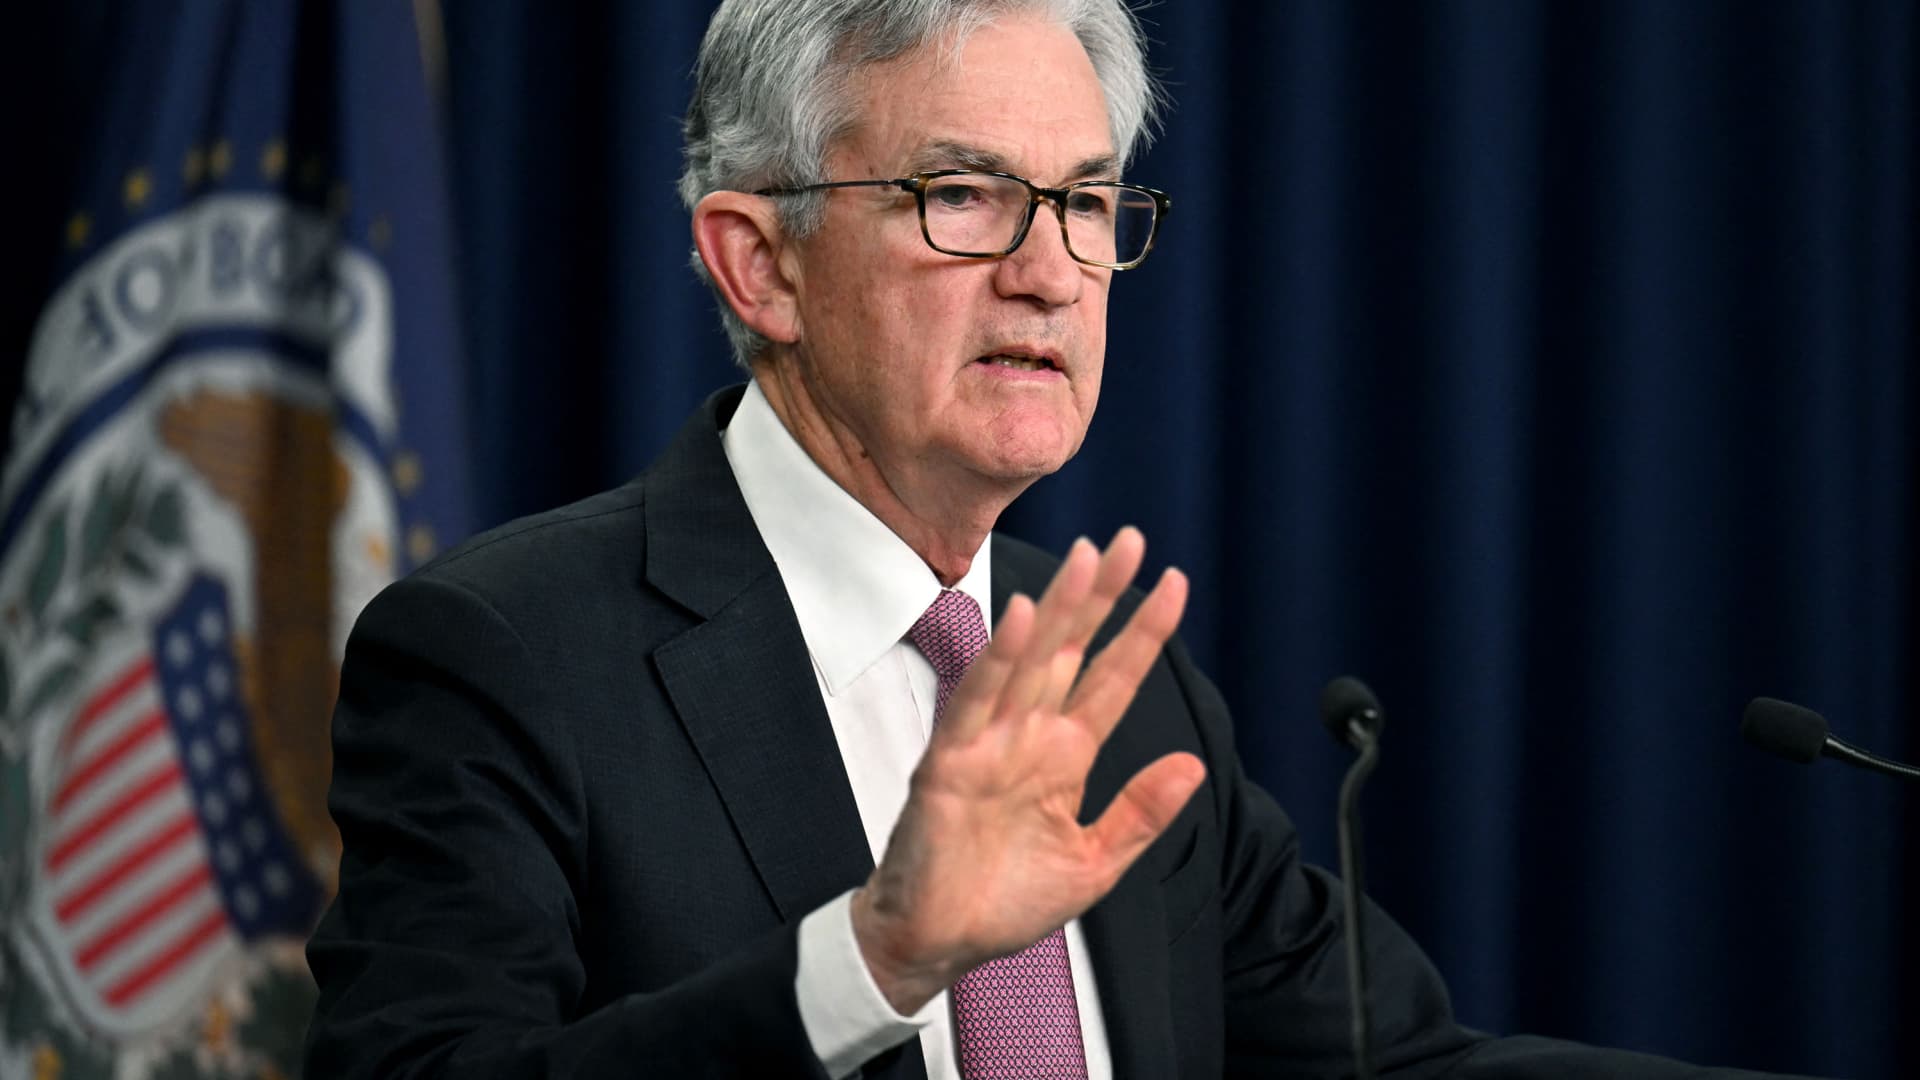 Here’s everything the Fed is expected to announce, including the biggest rate hike in 28 years